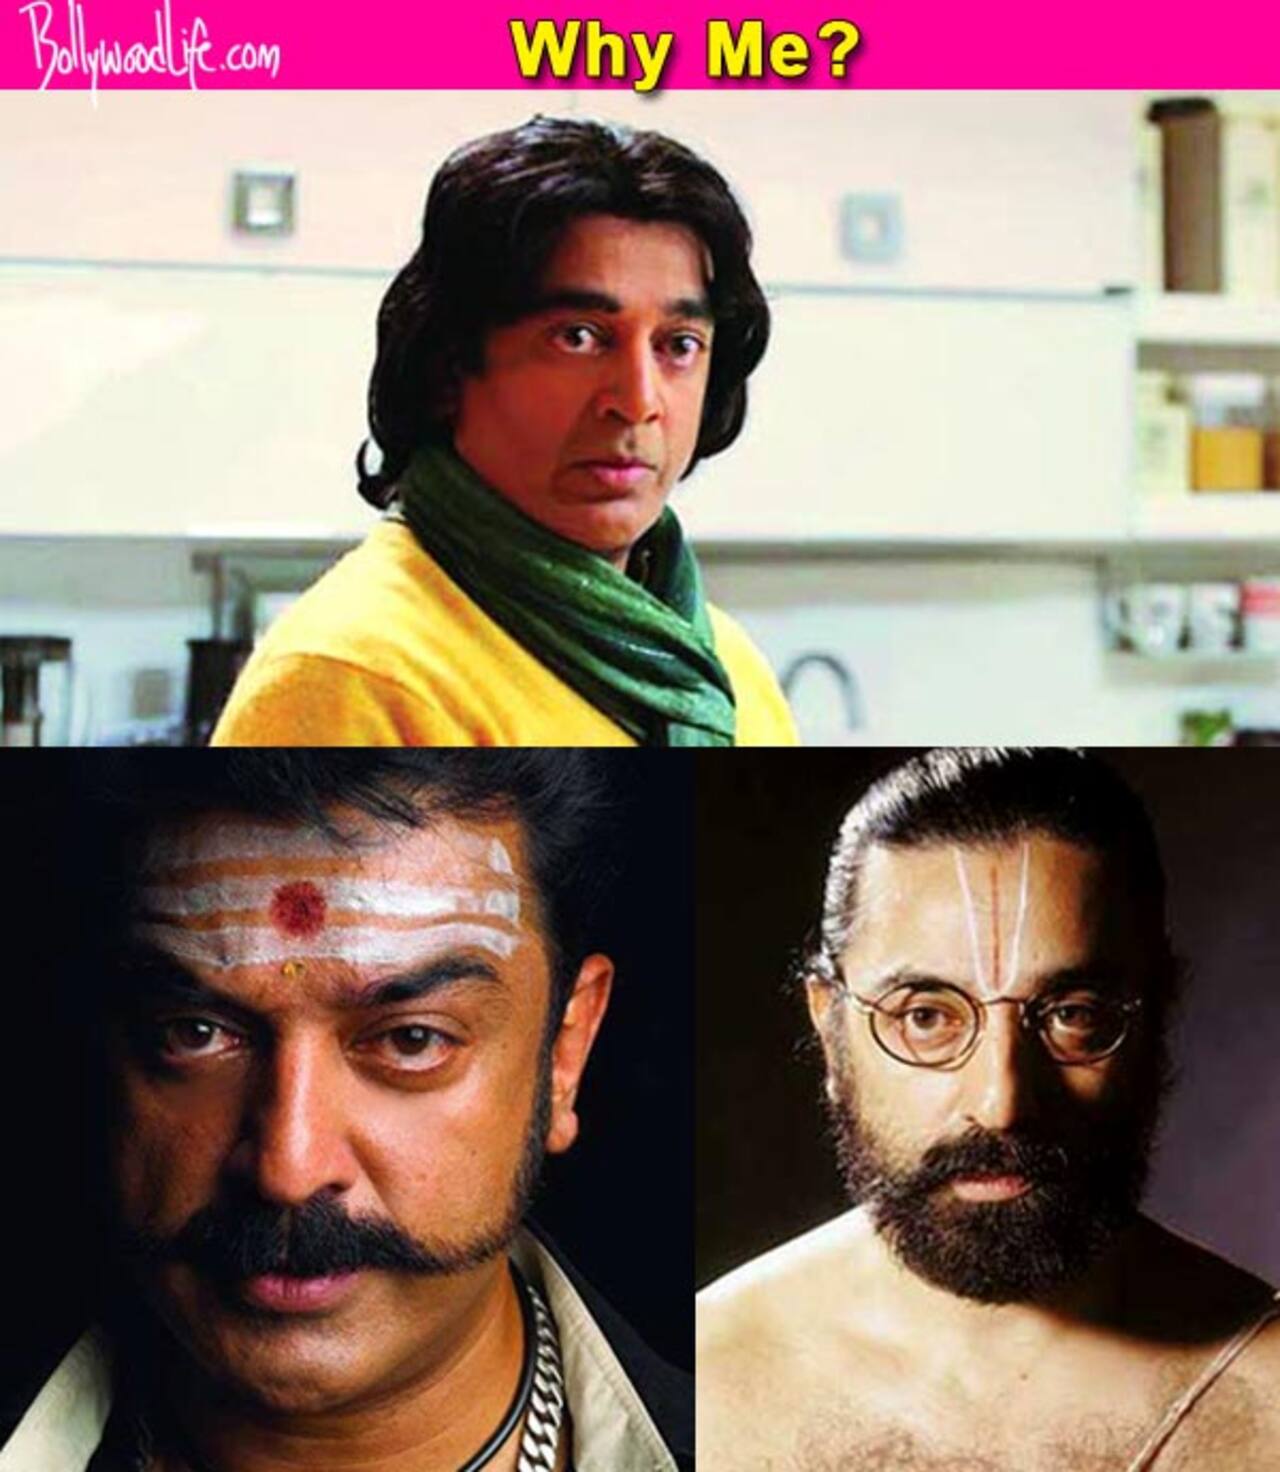 5 times Kamal Haasan has been unfairly targeted for being an honest, fearless artist!